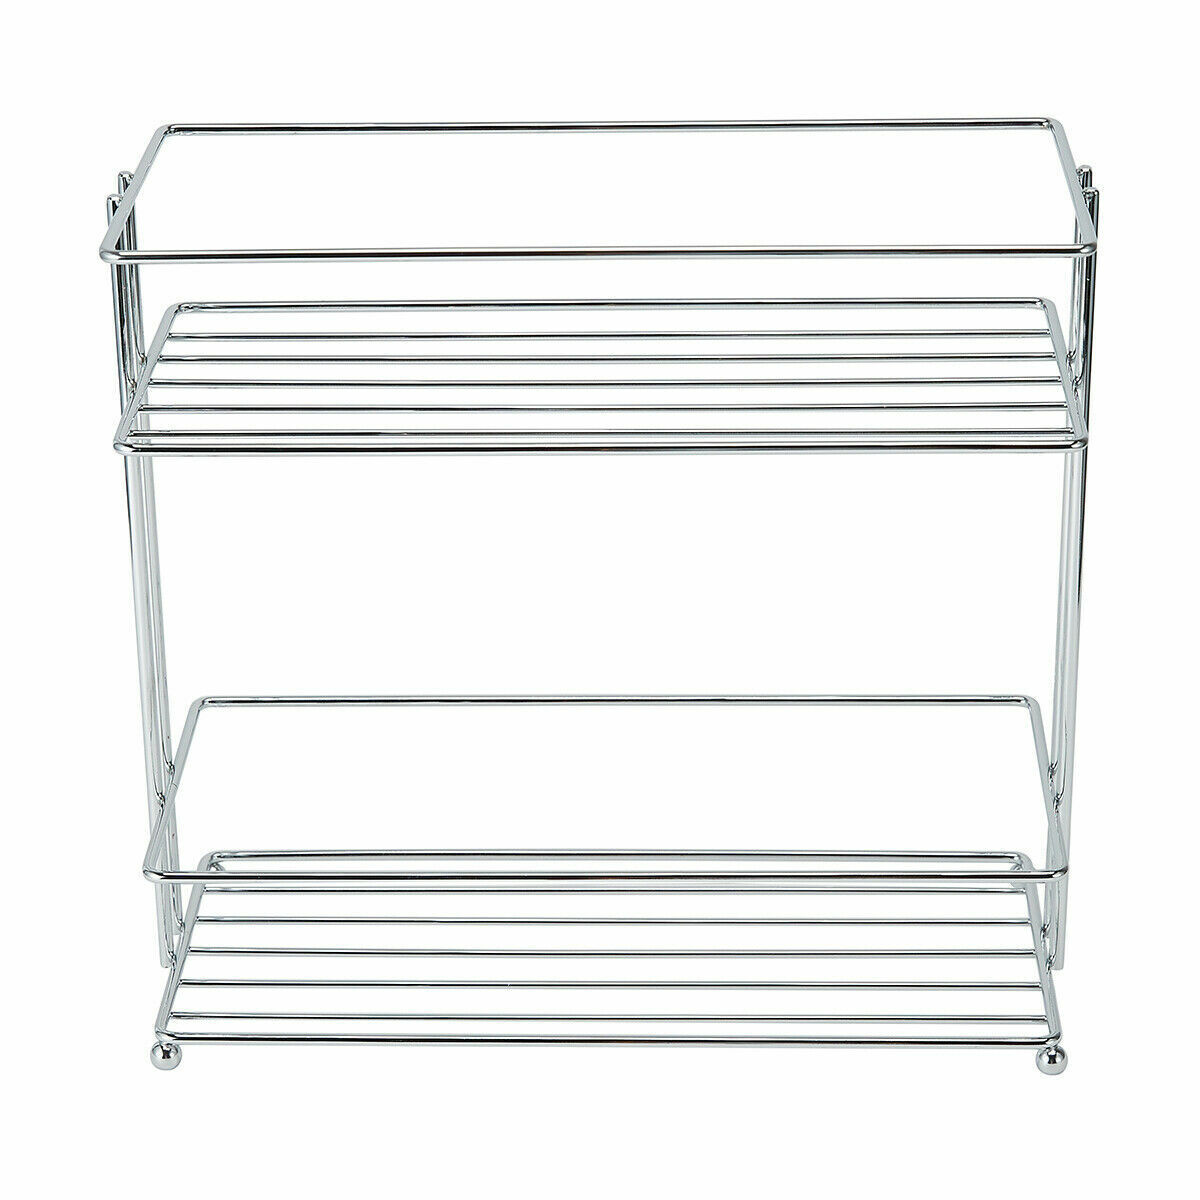 2 Tier Chrome Free Shipping New Spice Our shop OFFers the best service Caddy Shelves Storage Bathroom Shower Shelf